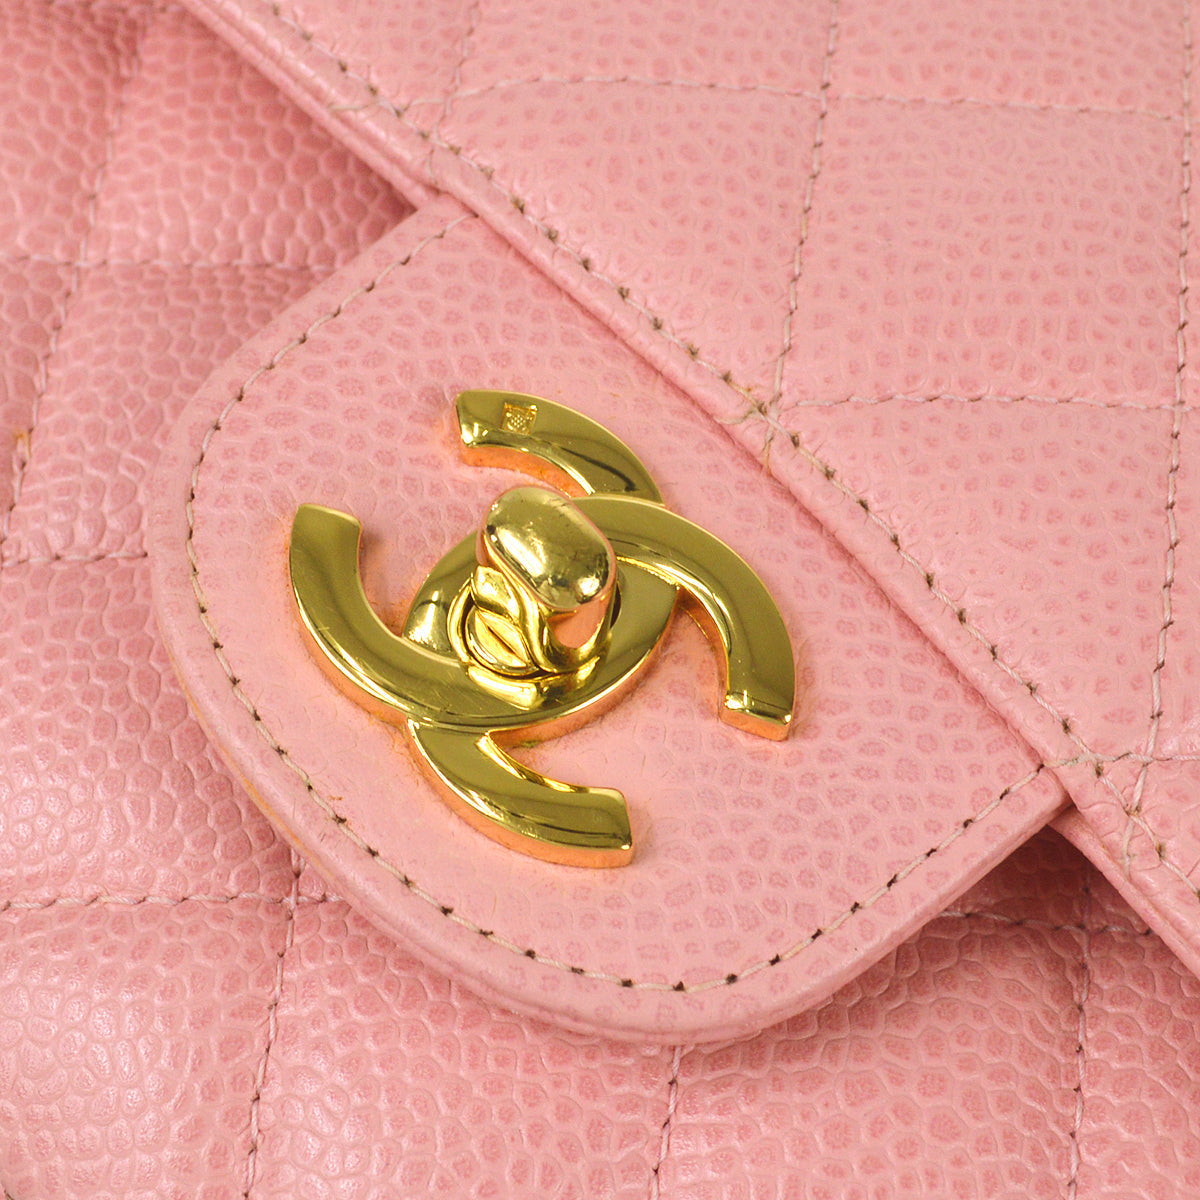 Chanel Classic Flap Quilted Medium 220522 Pink Cotton Shoulder Bag